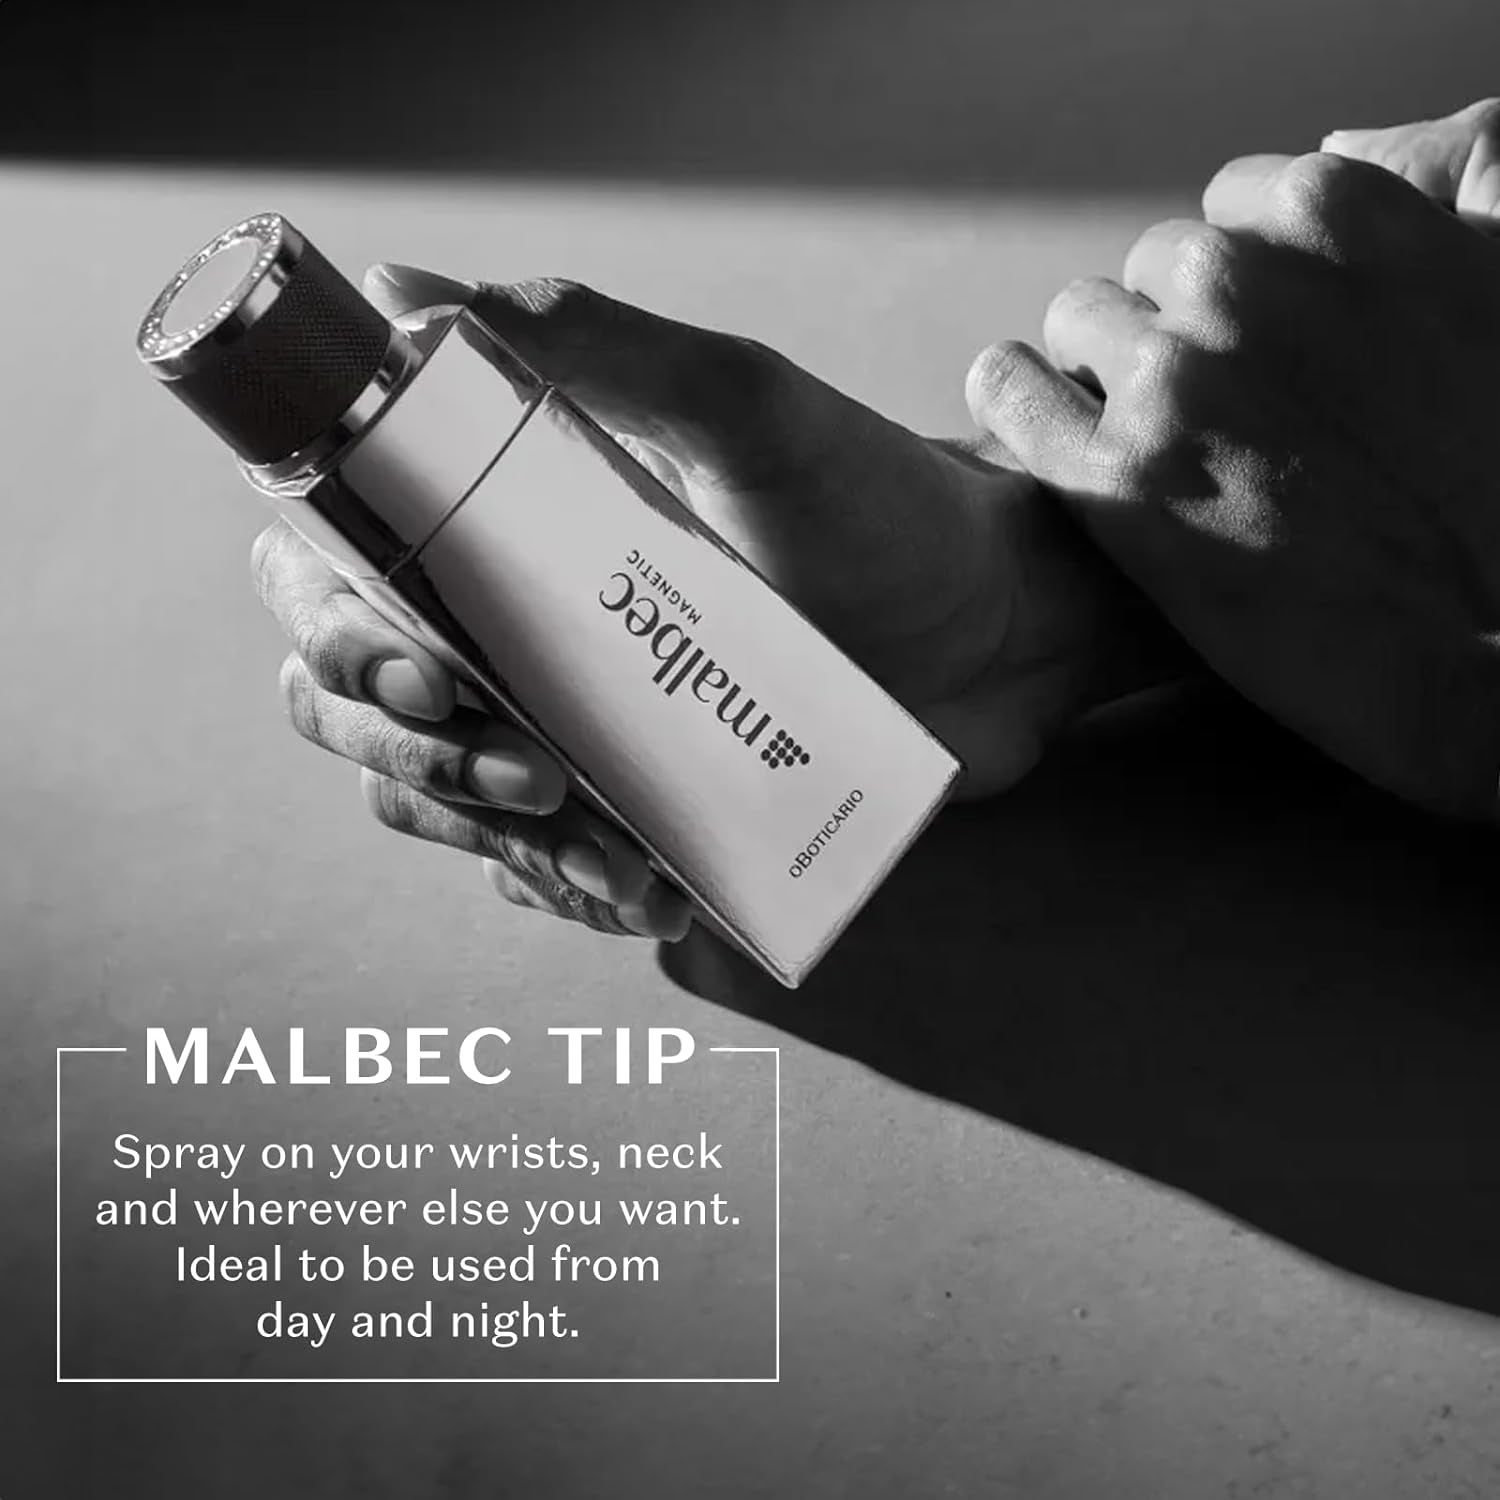 Malbec Cologne For Men - Magnetic Eau de Toilette By O Boticario, Long-Lasting Men's Fragrances - Made with French Oak Barrel-Aged Red Wine Alcohol - Woody Fruity Wine Perfume Scent - 3.3 fl oz Spray